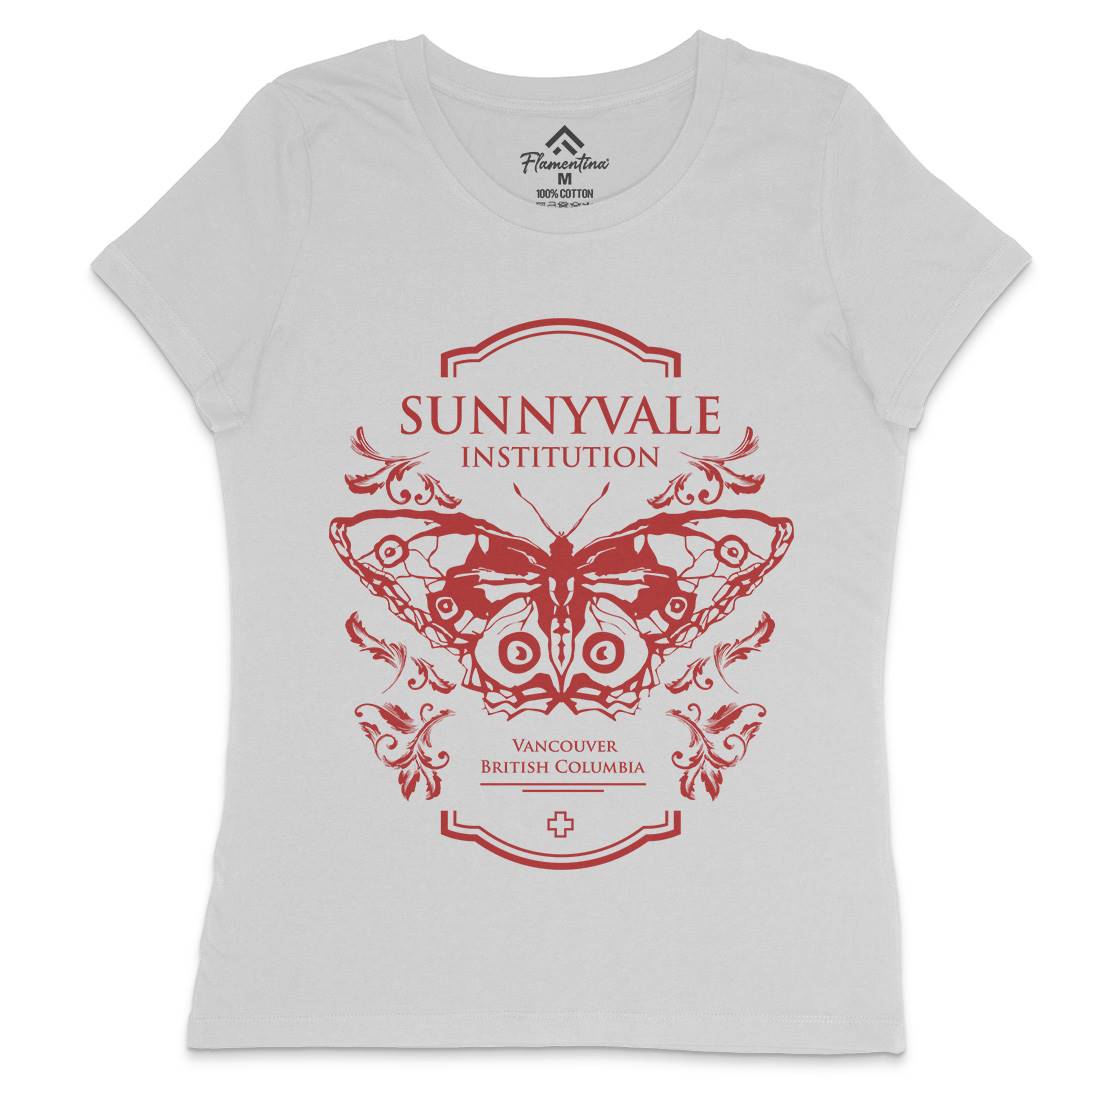 Sunnyvale Institution Womens Crew Neck T-Shirt Space D232